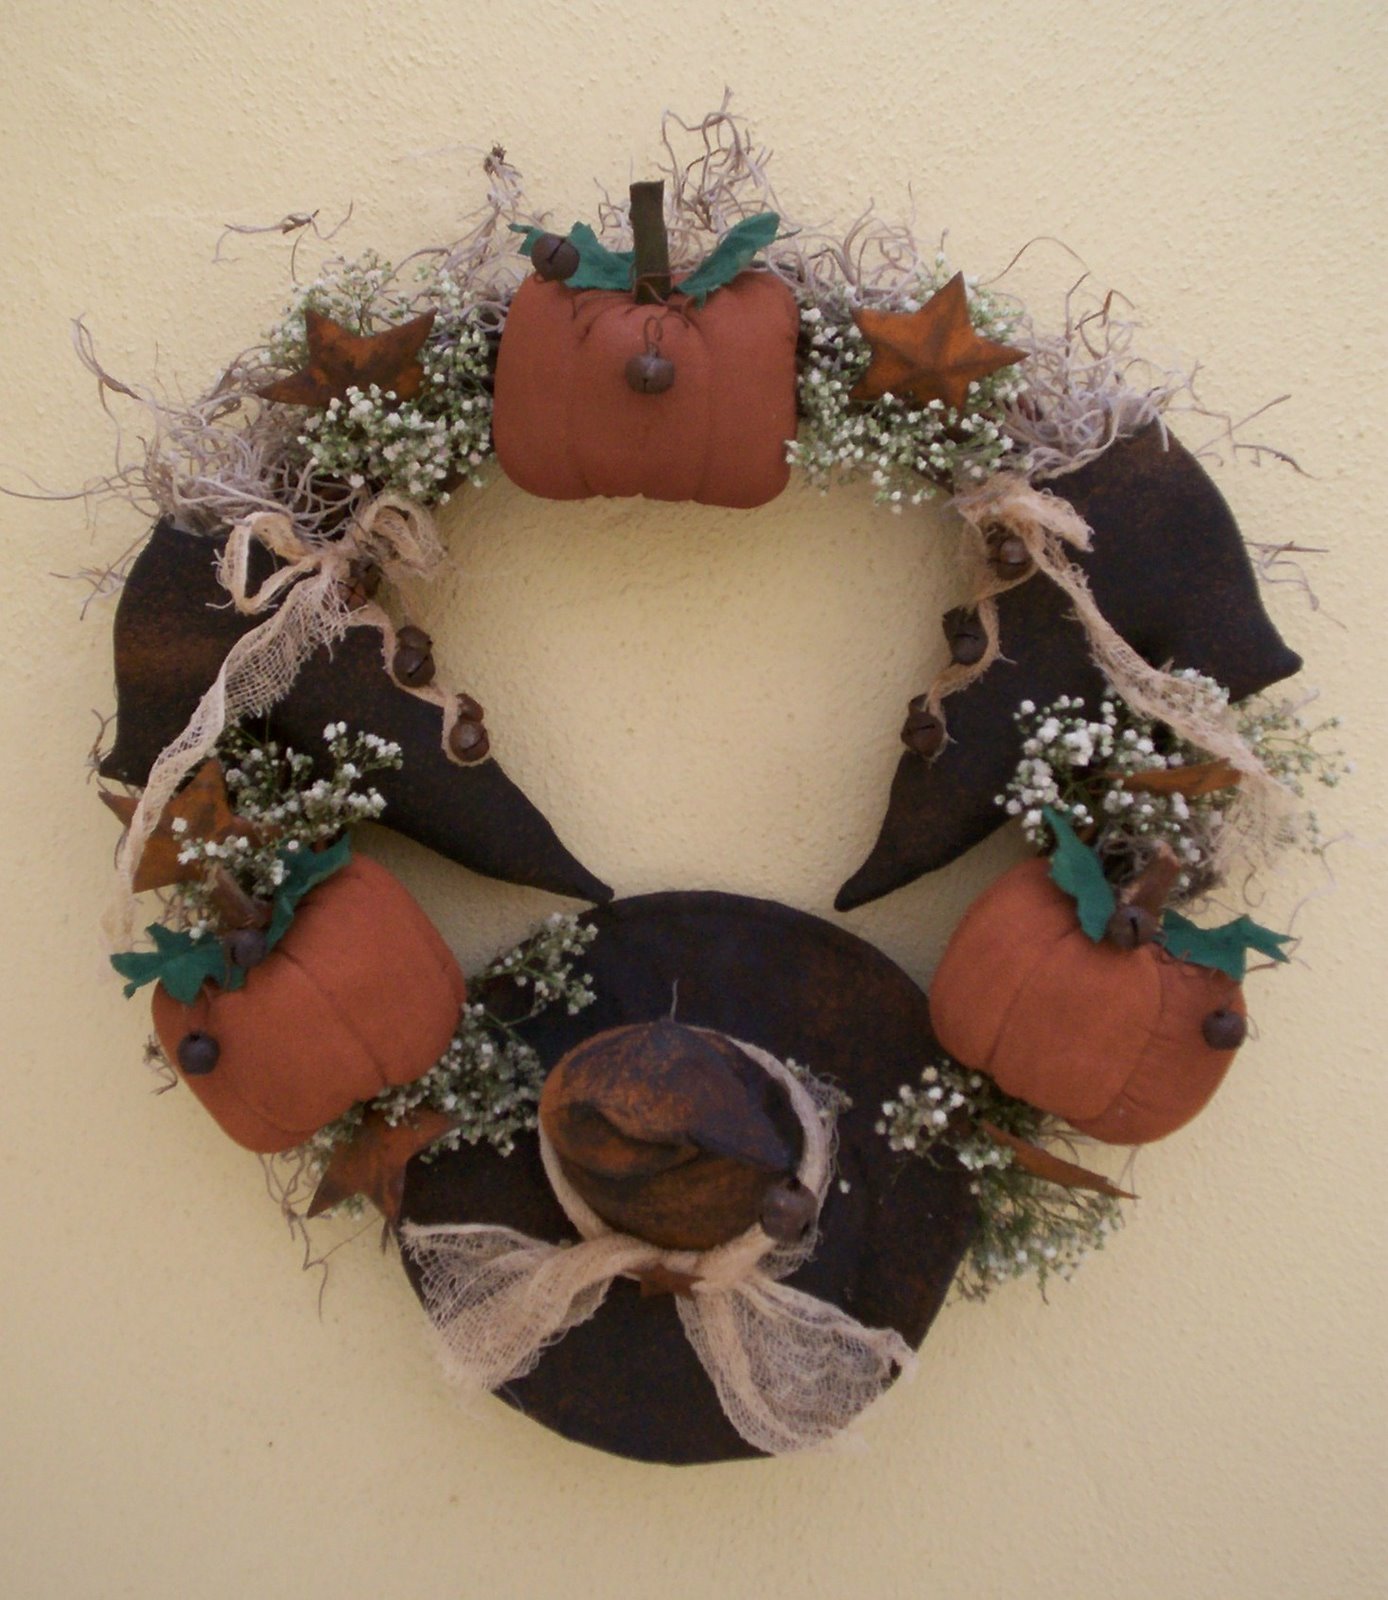 [witches+in+wreath.jpg]